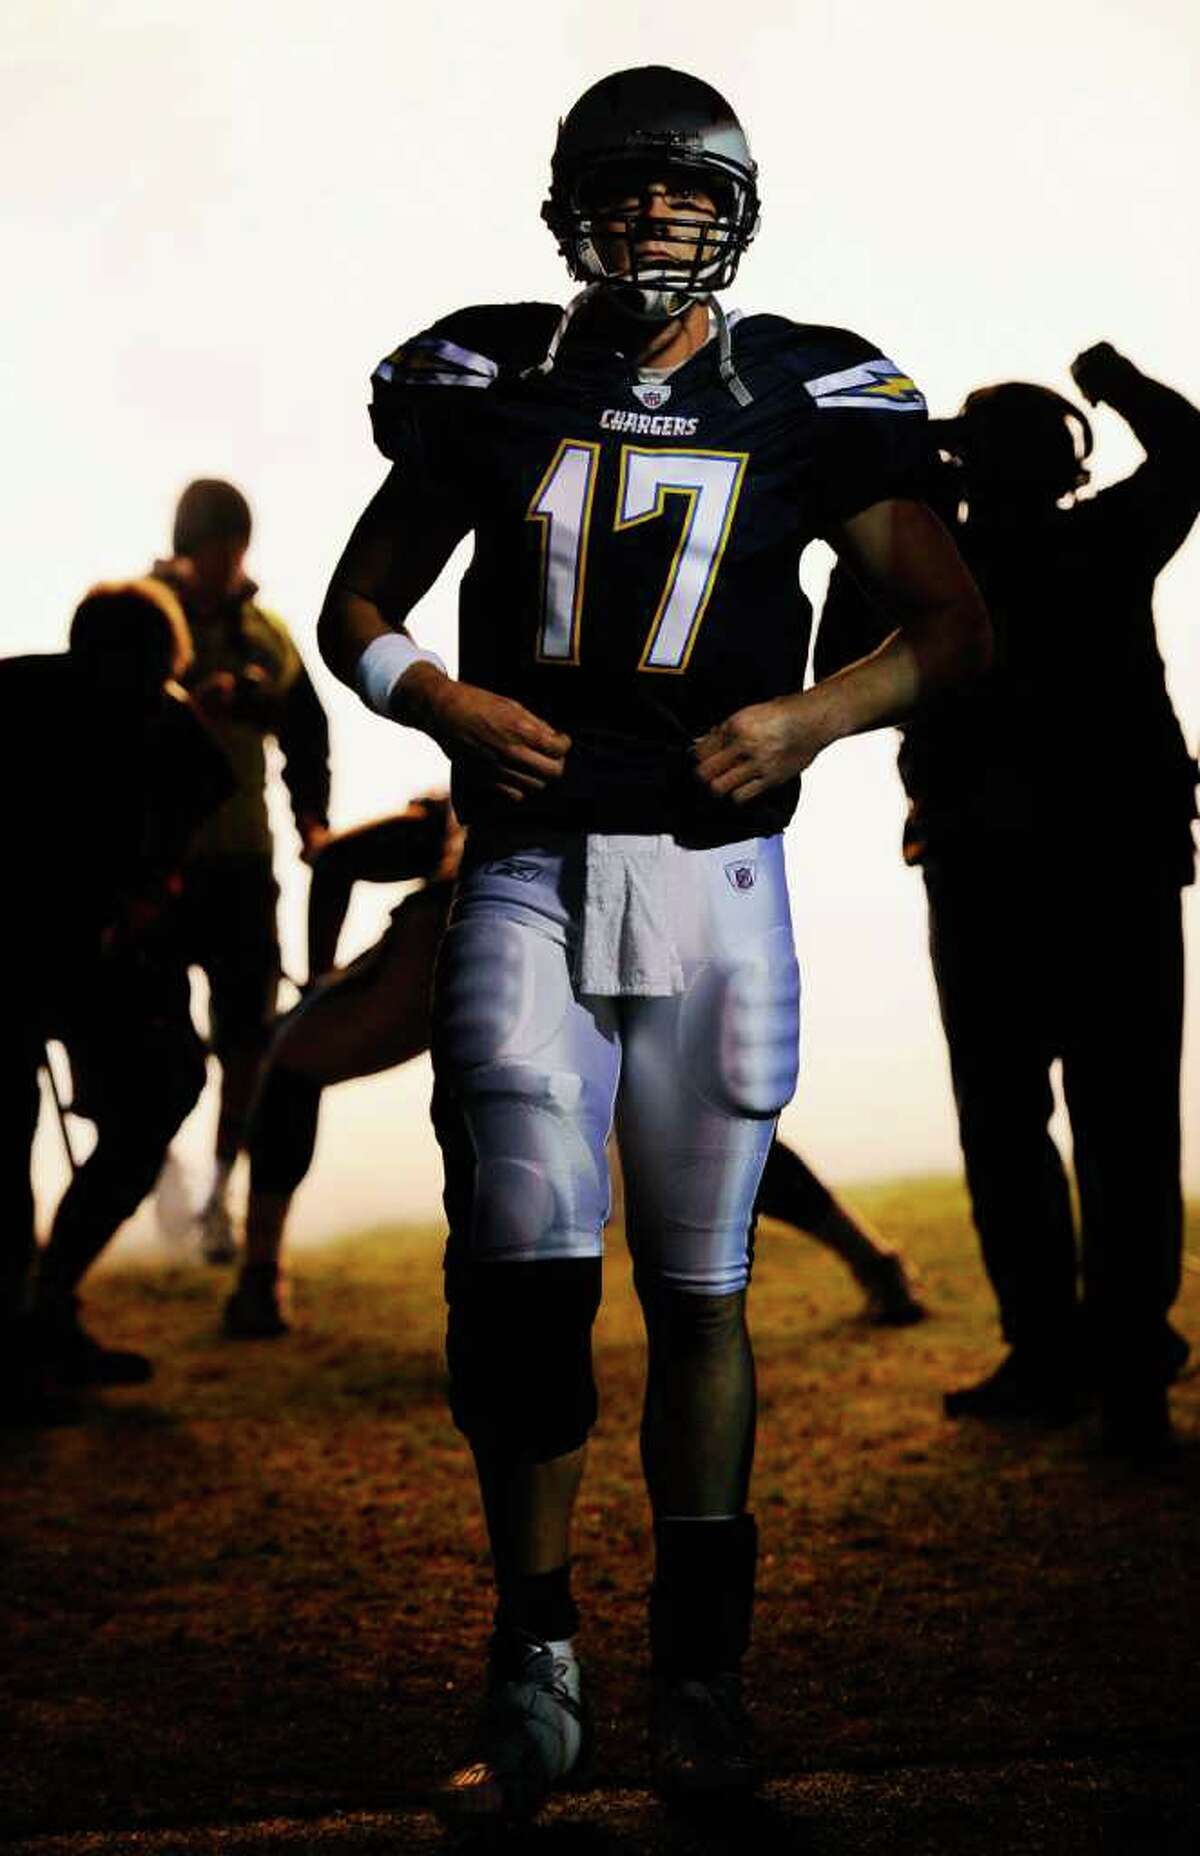 SAN DIEGO - NOVEMBER 22: Quarterback Philip Rivers #17 of the San Diego Chargers waits to be introduced prior to the start of the NFL football game against Denver Broncos at Qualcomm Stadium on November 22, 2010 in San Diego, California. (Photo by Kevork Djansezian/Getty Images) *** Local Caption *** Philip Rivers